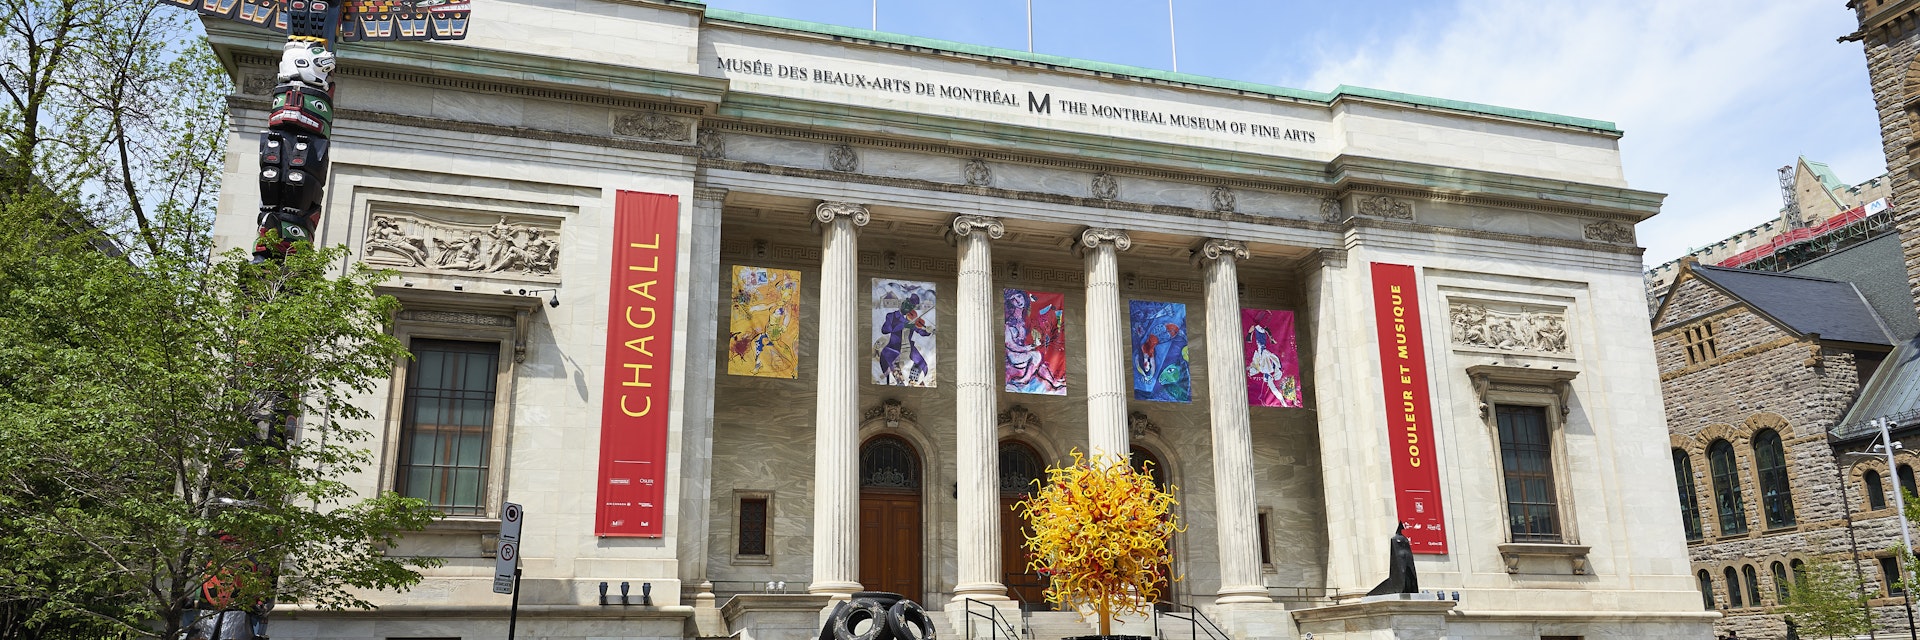 Montreal, Quebec, Canada - 18 May 2017: Sherbrooke Street West with the Facade of the Montreal Museum of Fine Art.
688955530
fine, arts, culture, exterior, classical, column, sightseeing, outdoor, view, building, construction, scene, american, famous, place, historical, heritage, architectural, chagall, totem